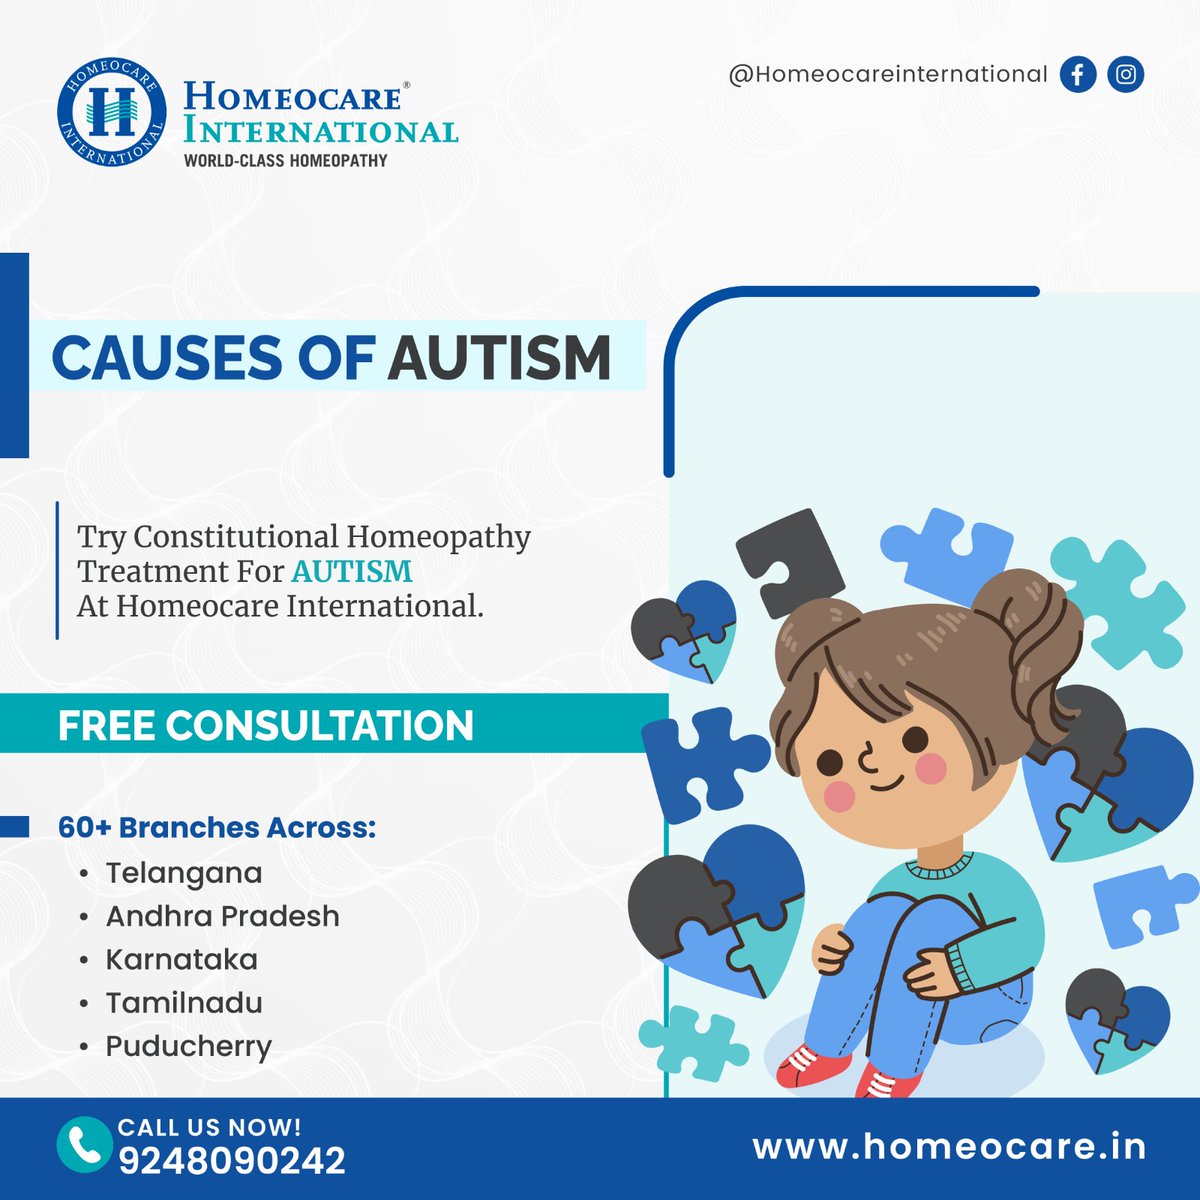 Unraveling the Puzzle: Understand the Causes of Autism.                                                           #AutismTreatment #UnlockingPotential #Homeocare #Homeocareinternational